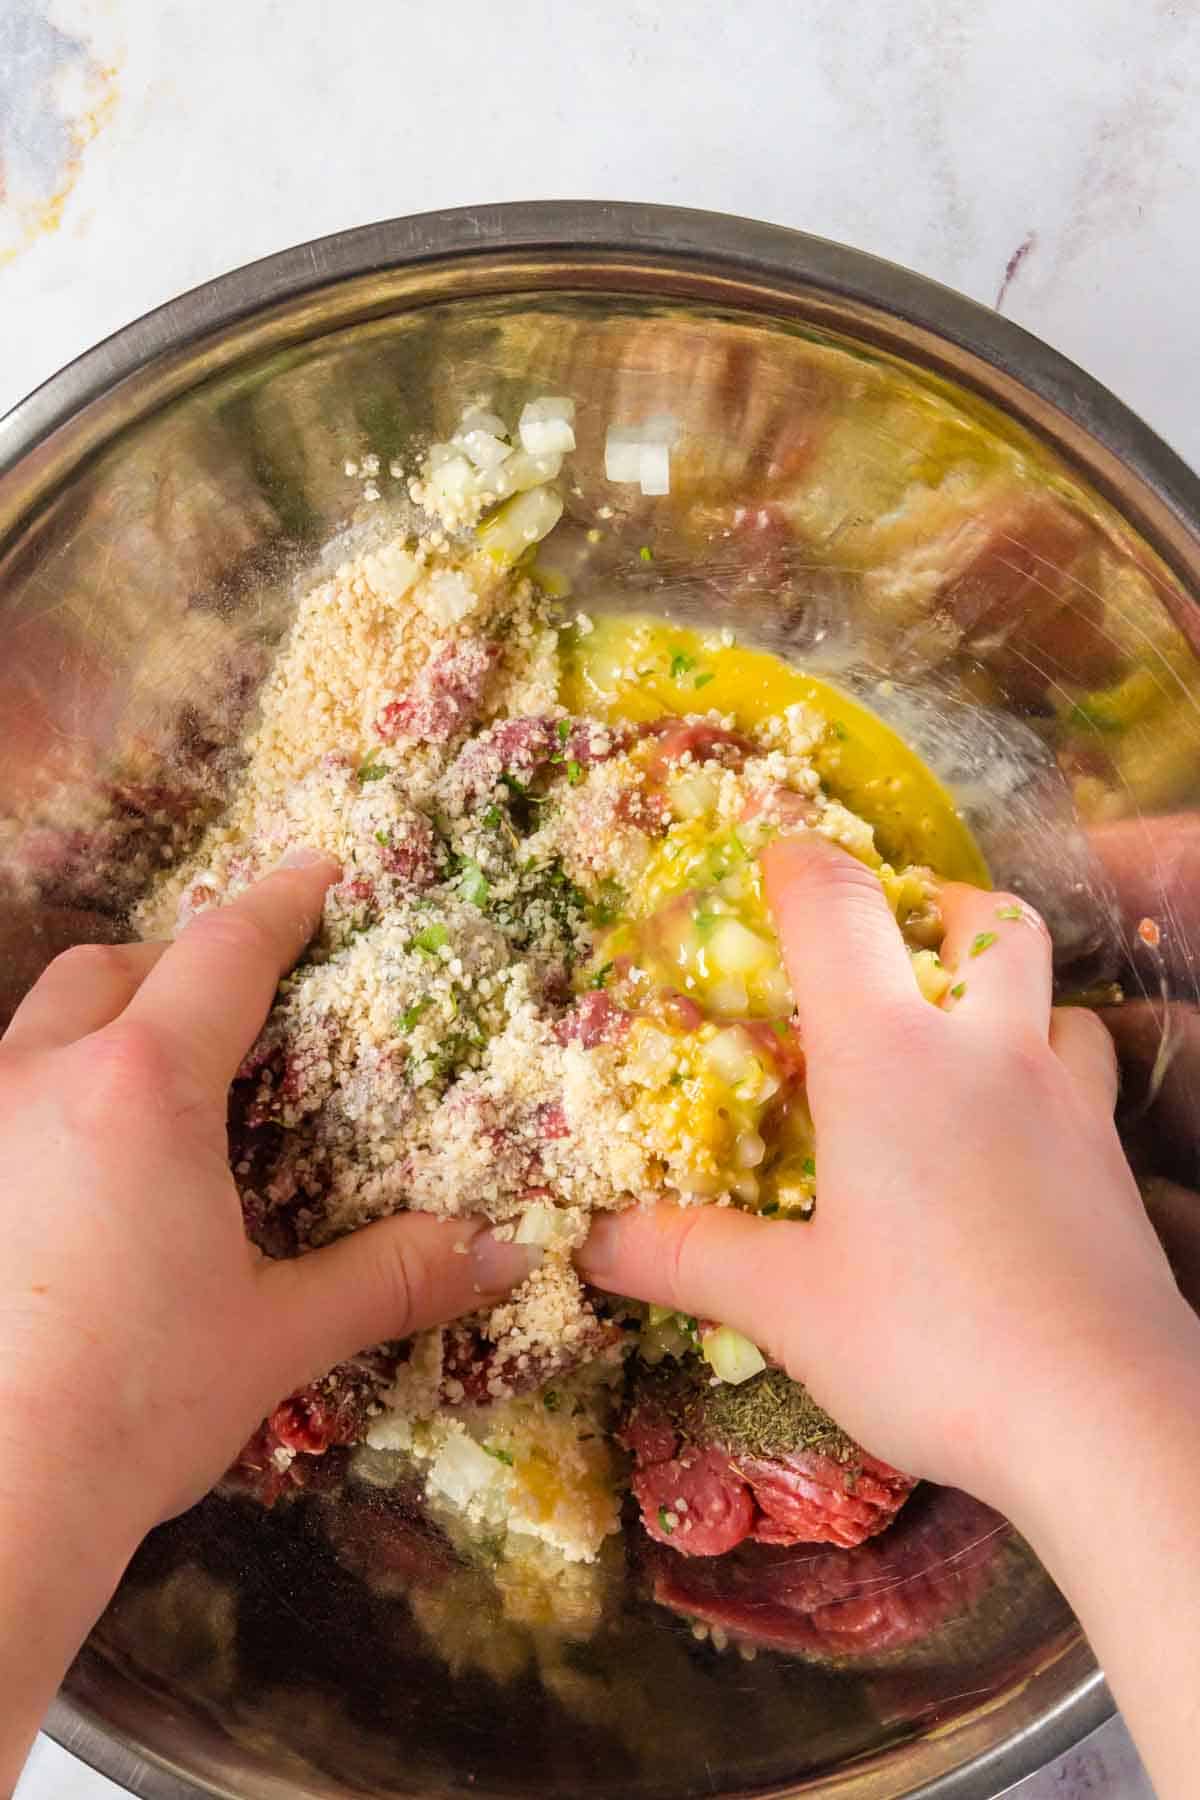 The meat mixture ingredients in a metal mixing bowl being combined by a pair of hands